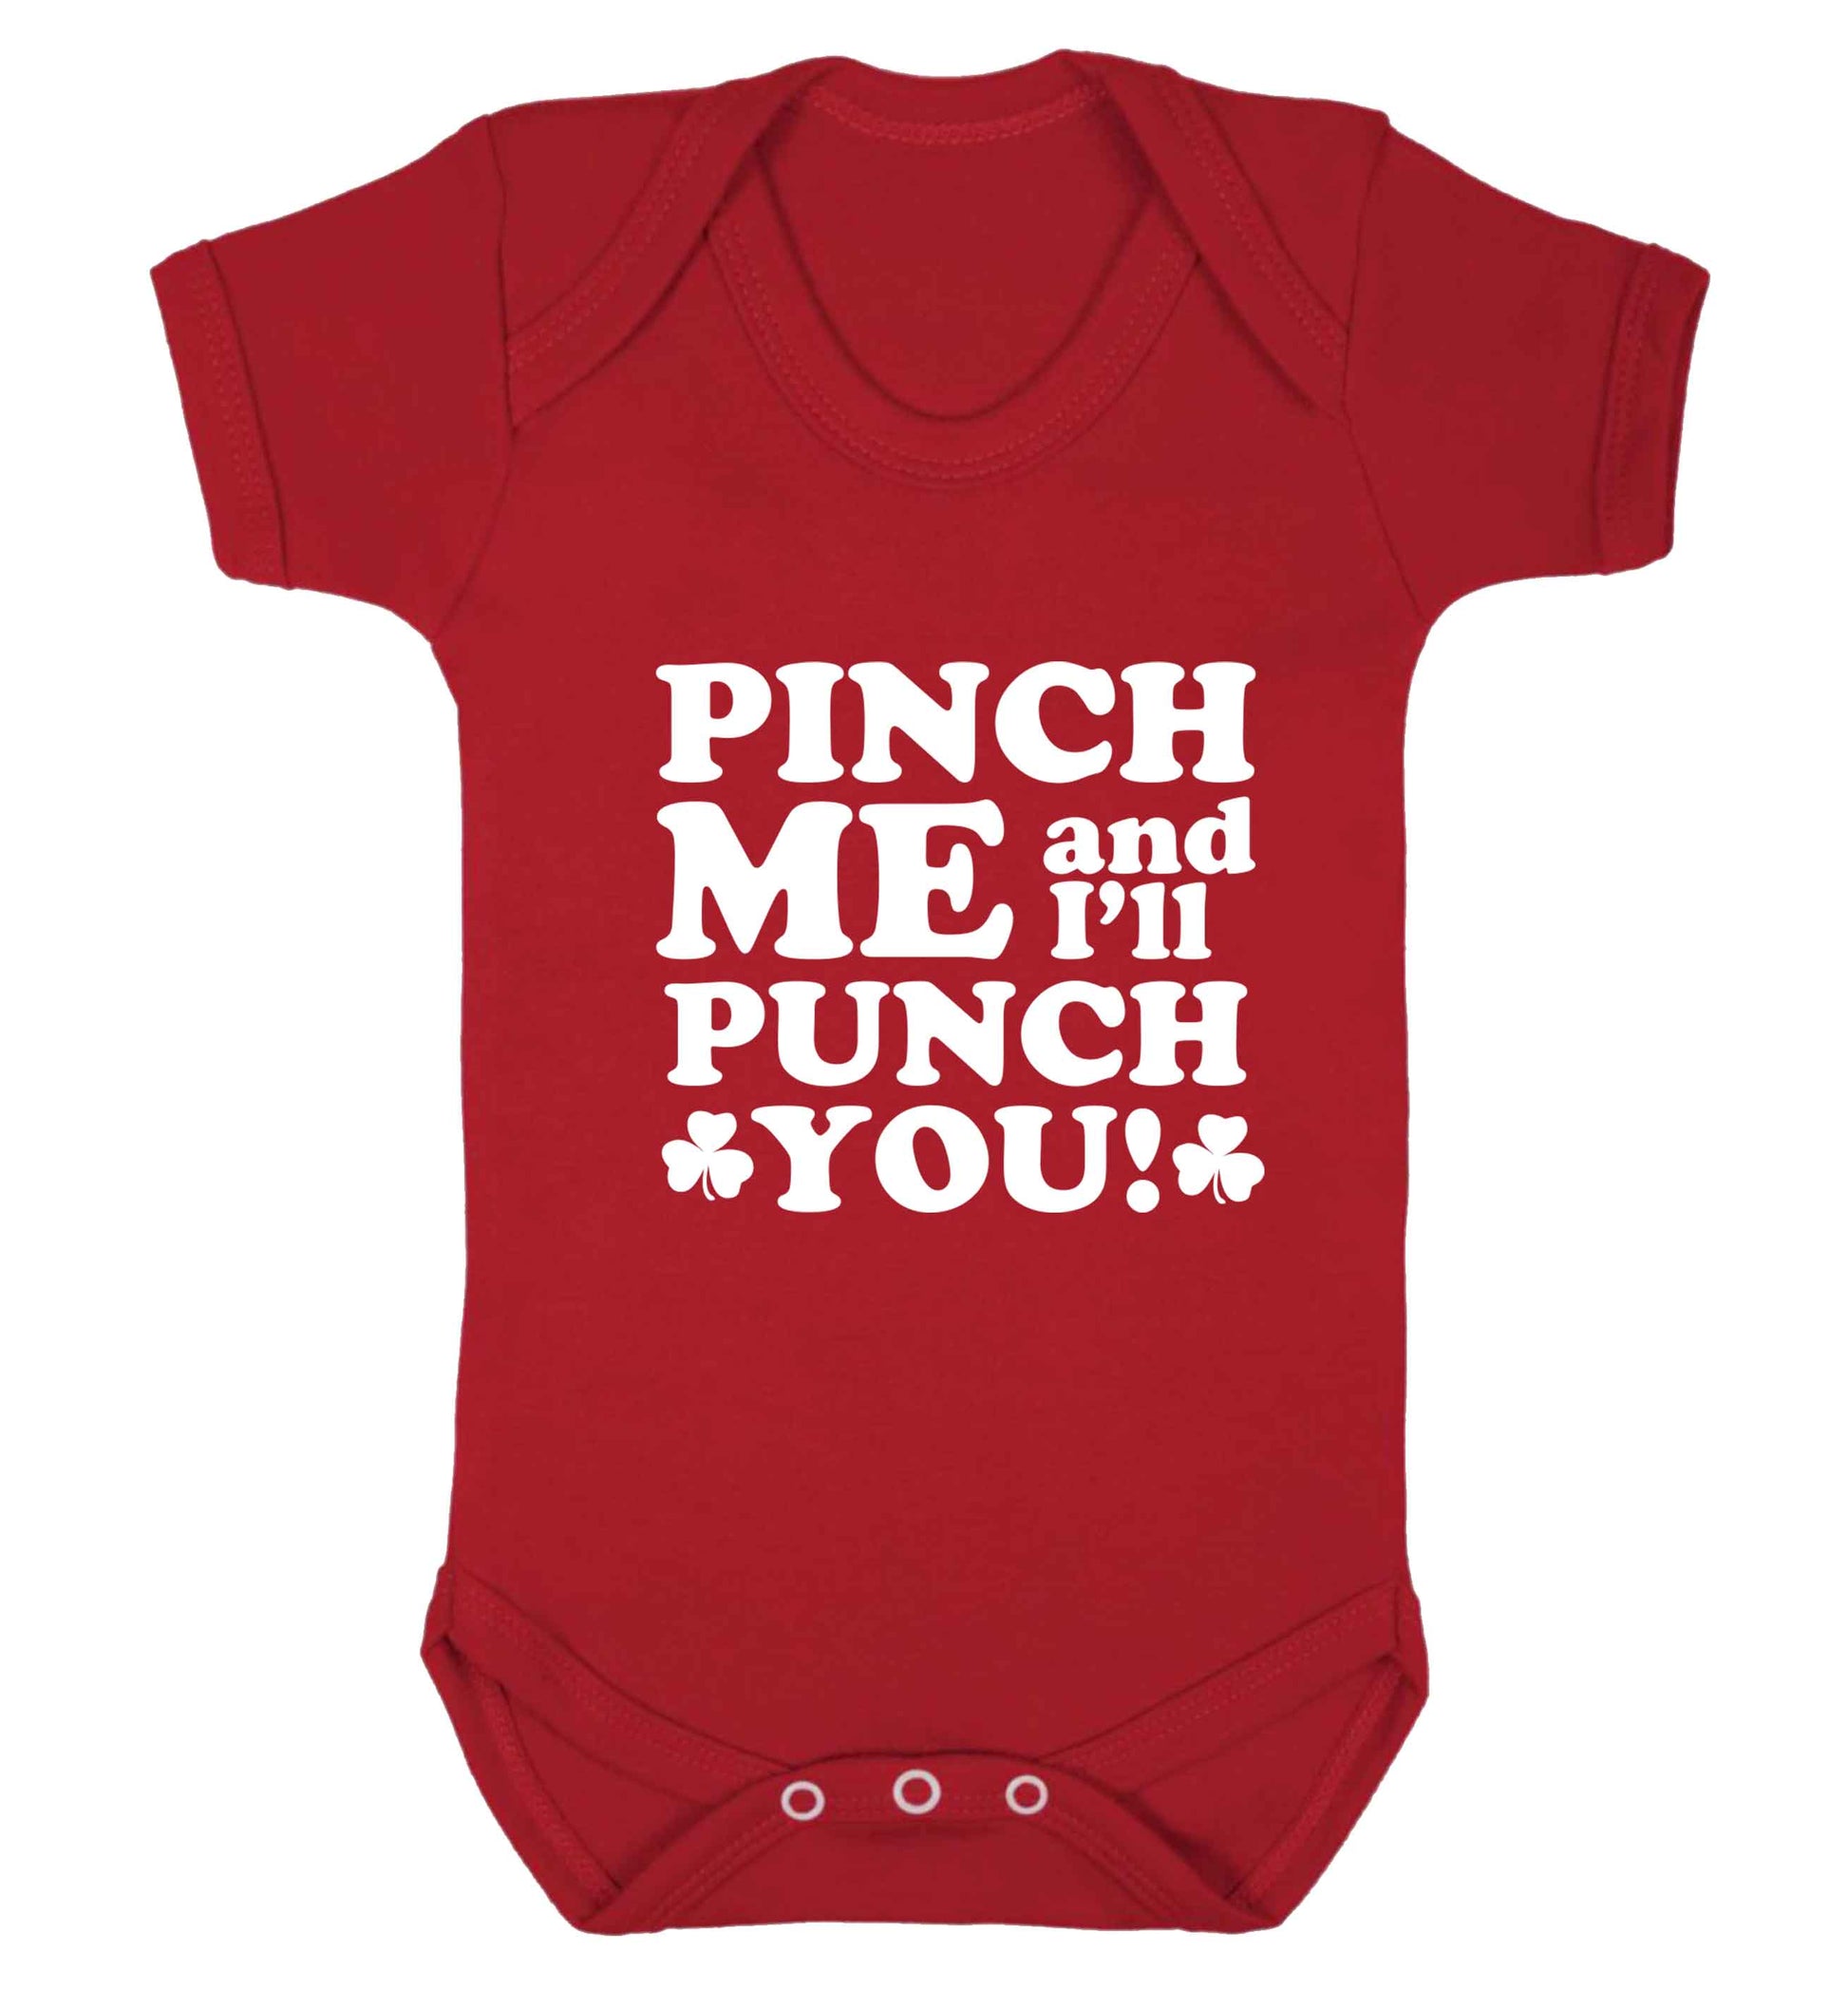 Pinch me and I'll punch you baby vest red 18-24 months